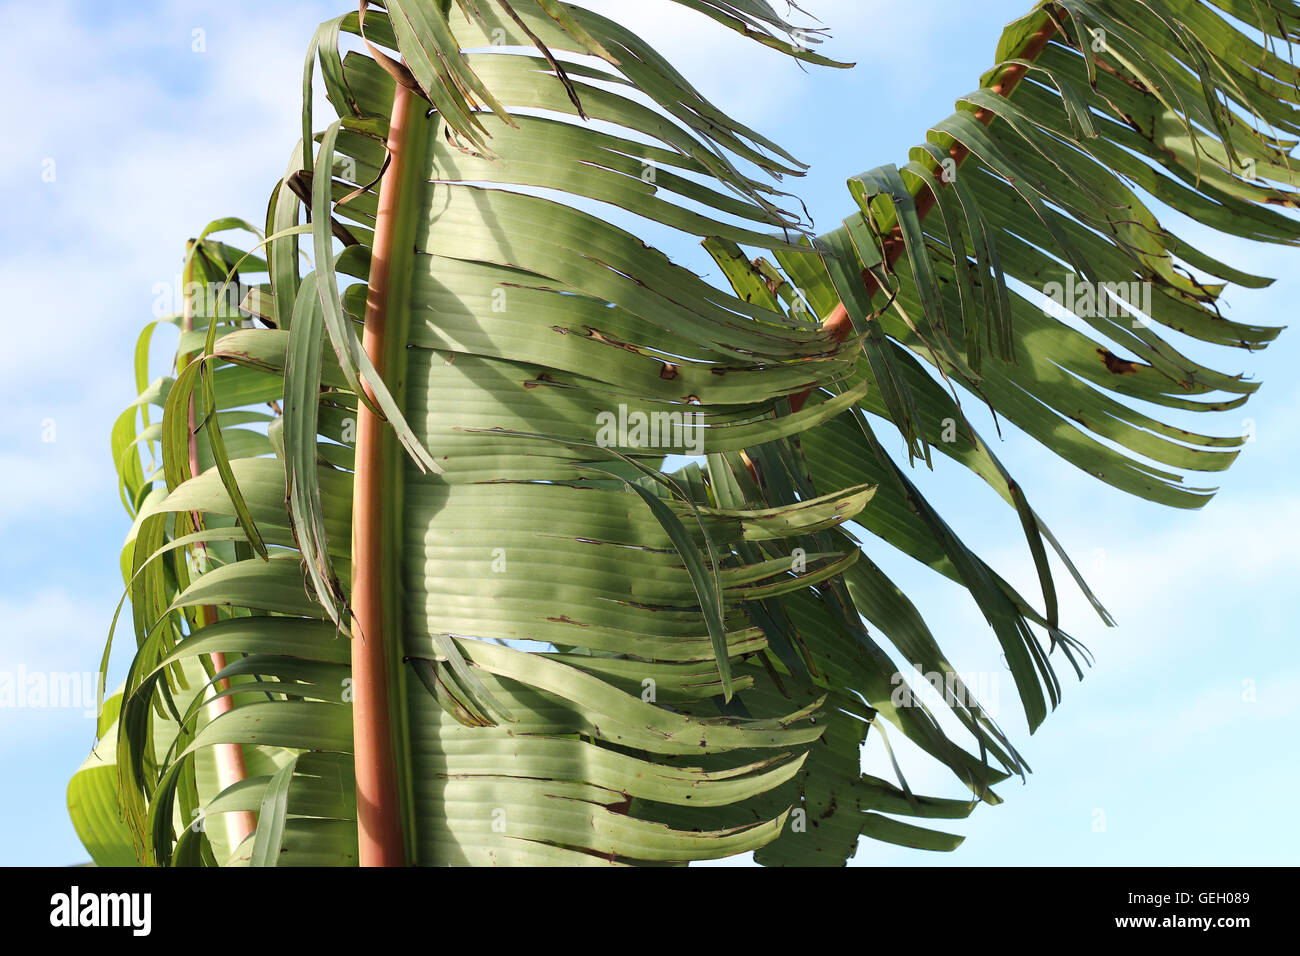 Torn and shredded banana leaves damaged by strong wind in winter time in Melbourne Victoria Australia Stock Photo